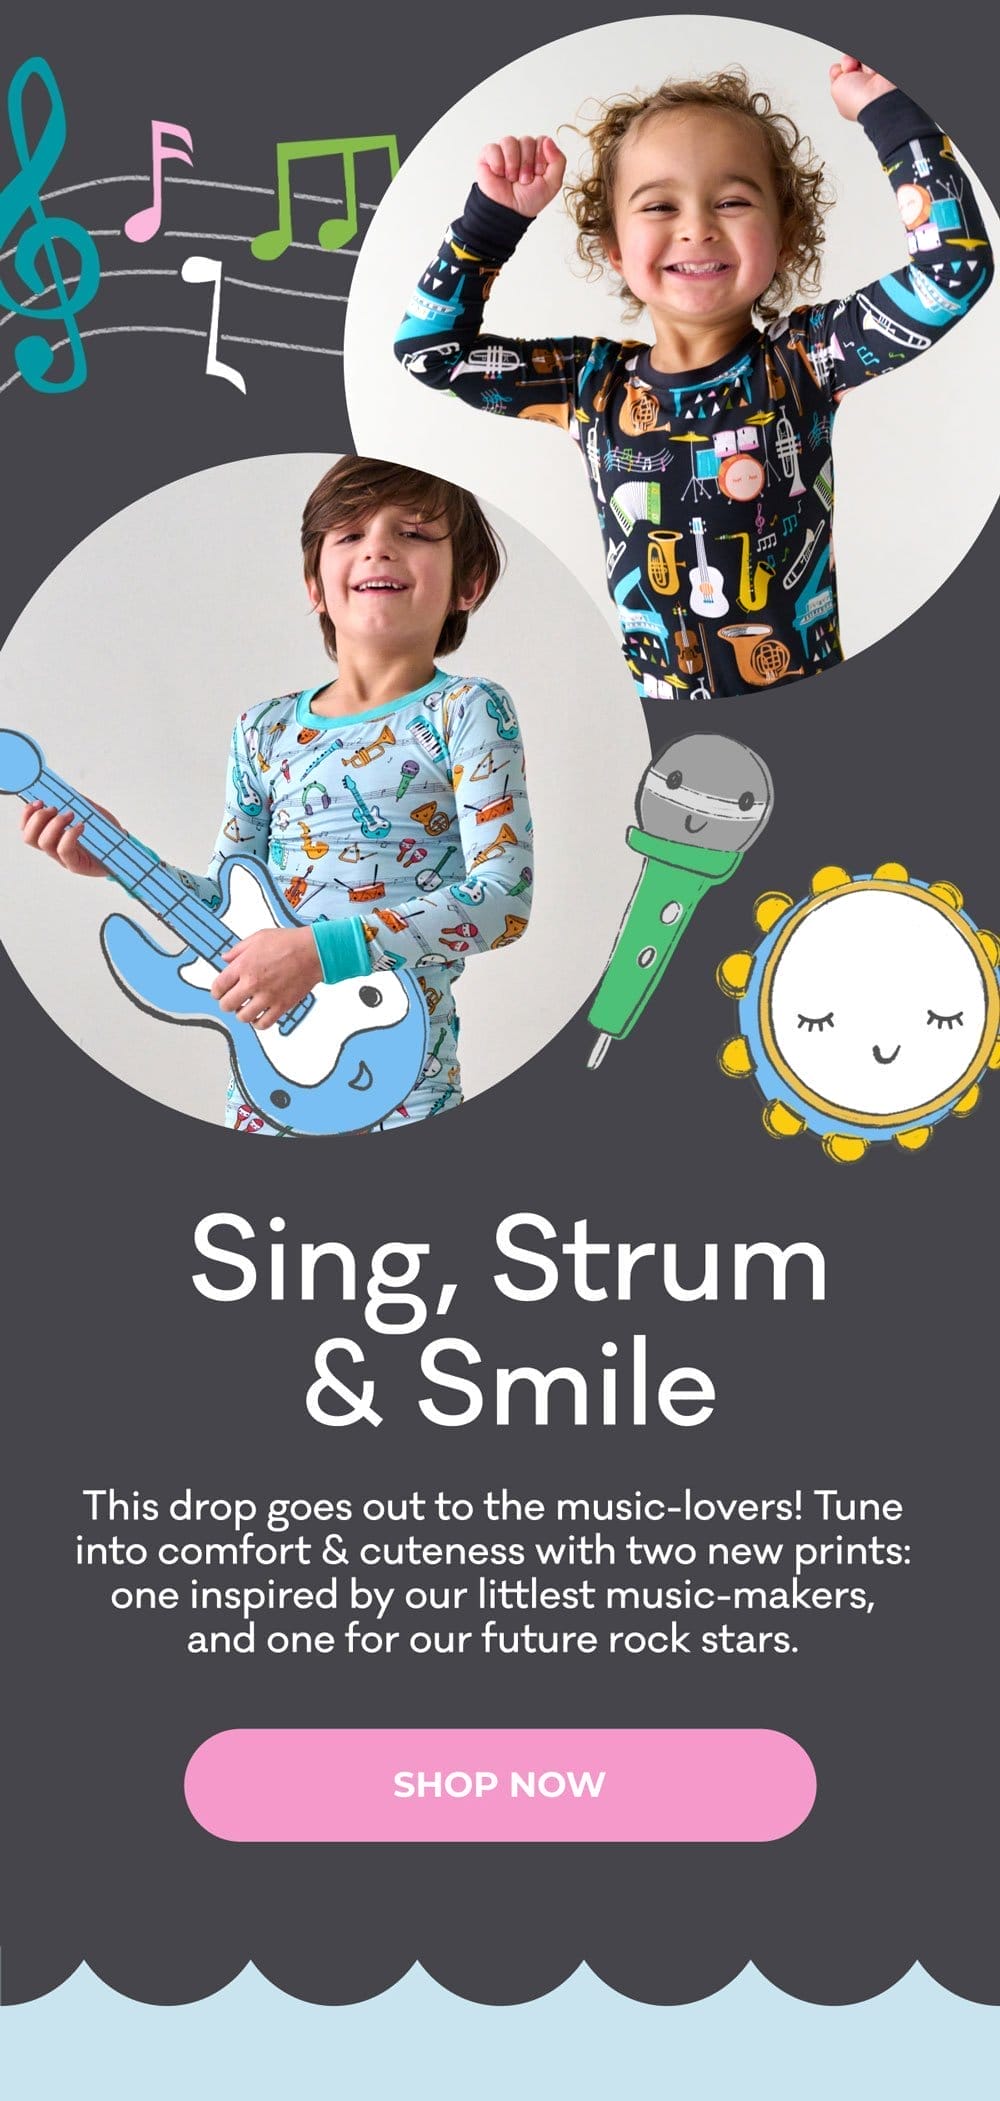 Sing, Strum & Smile | This drop goes out to the music-lovers! Tune into comfort & cuteness with two new prints: one inspired by our littlest music-makers, and one for our future rock stars. | SHOP NOW